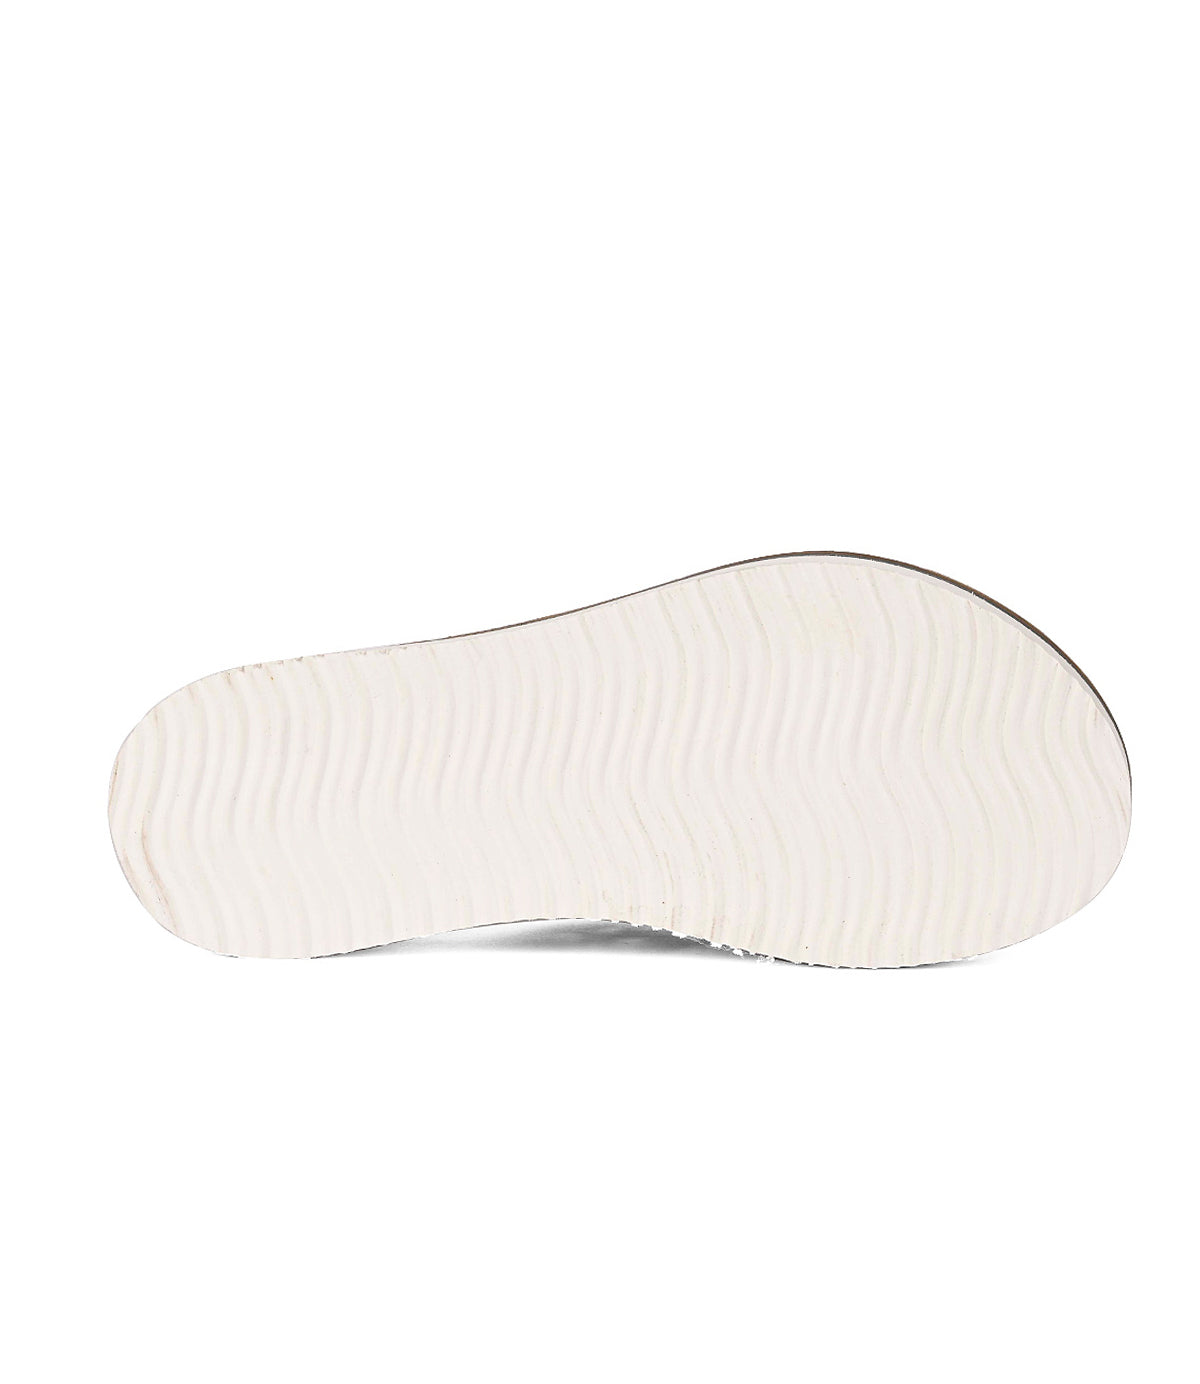 
                  
                    White rubber shoe sole with a textured pattern and leather cross straps on a white background by Roan Chant.
                  
                